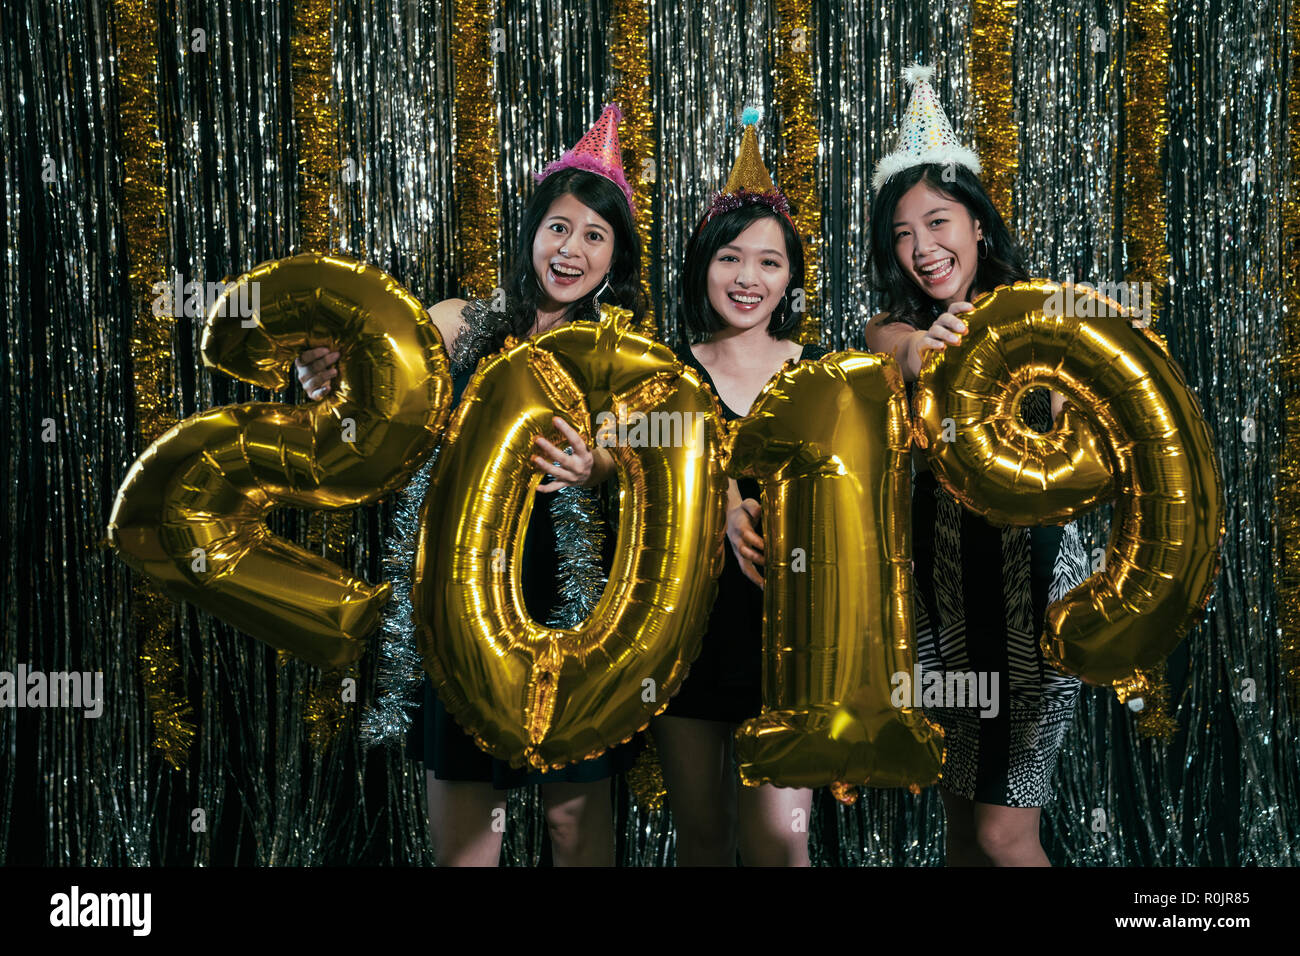 girls carrying gold colored numbers 2019 balloon showing to camera smiling attractive. young ladies celebrating new year countdown at nightclub. asian Stock Photo